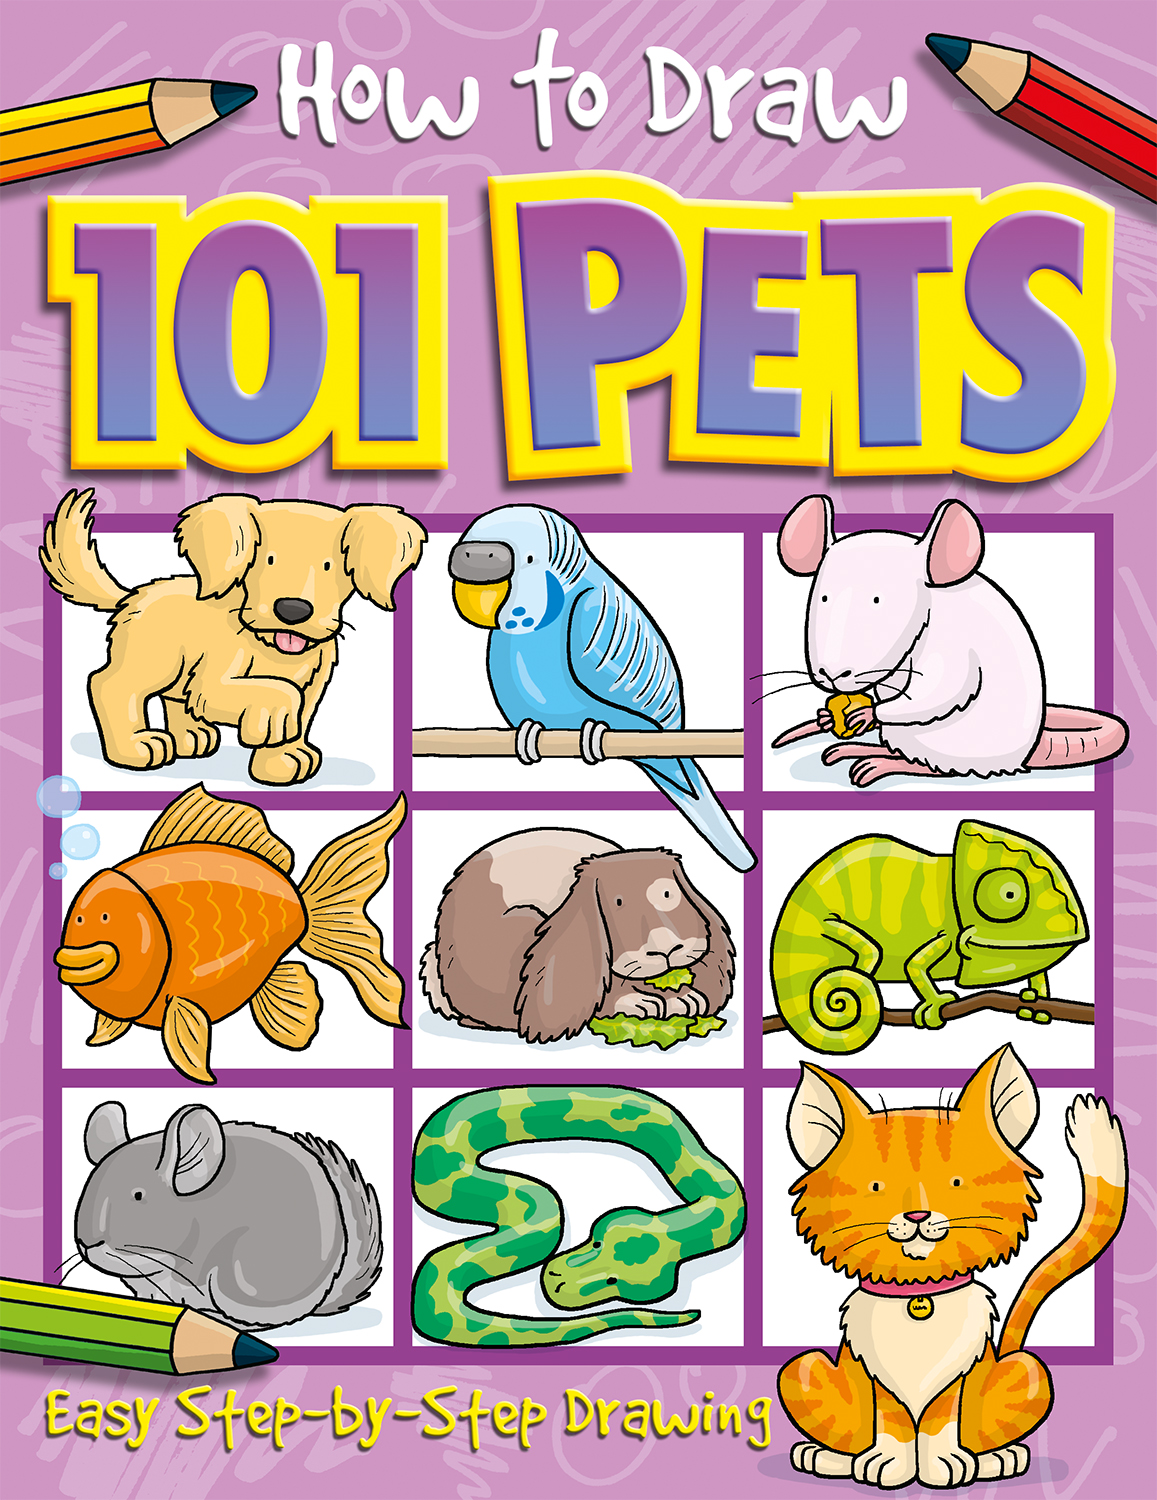 HOW TO DRAW 101 PETS